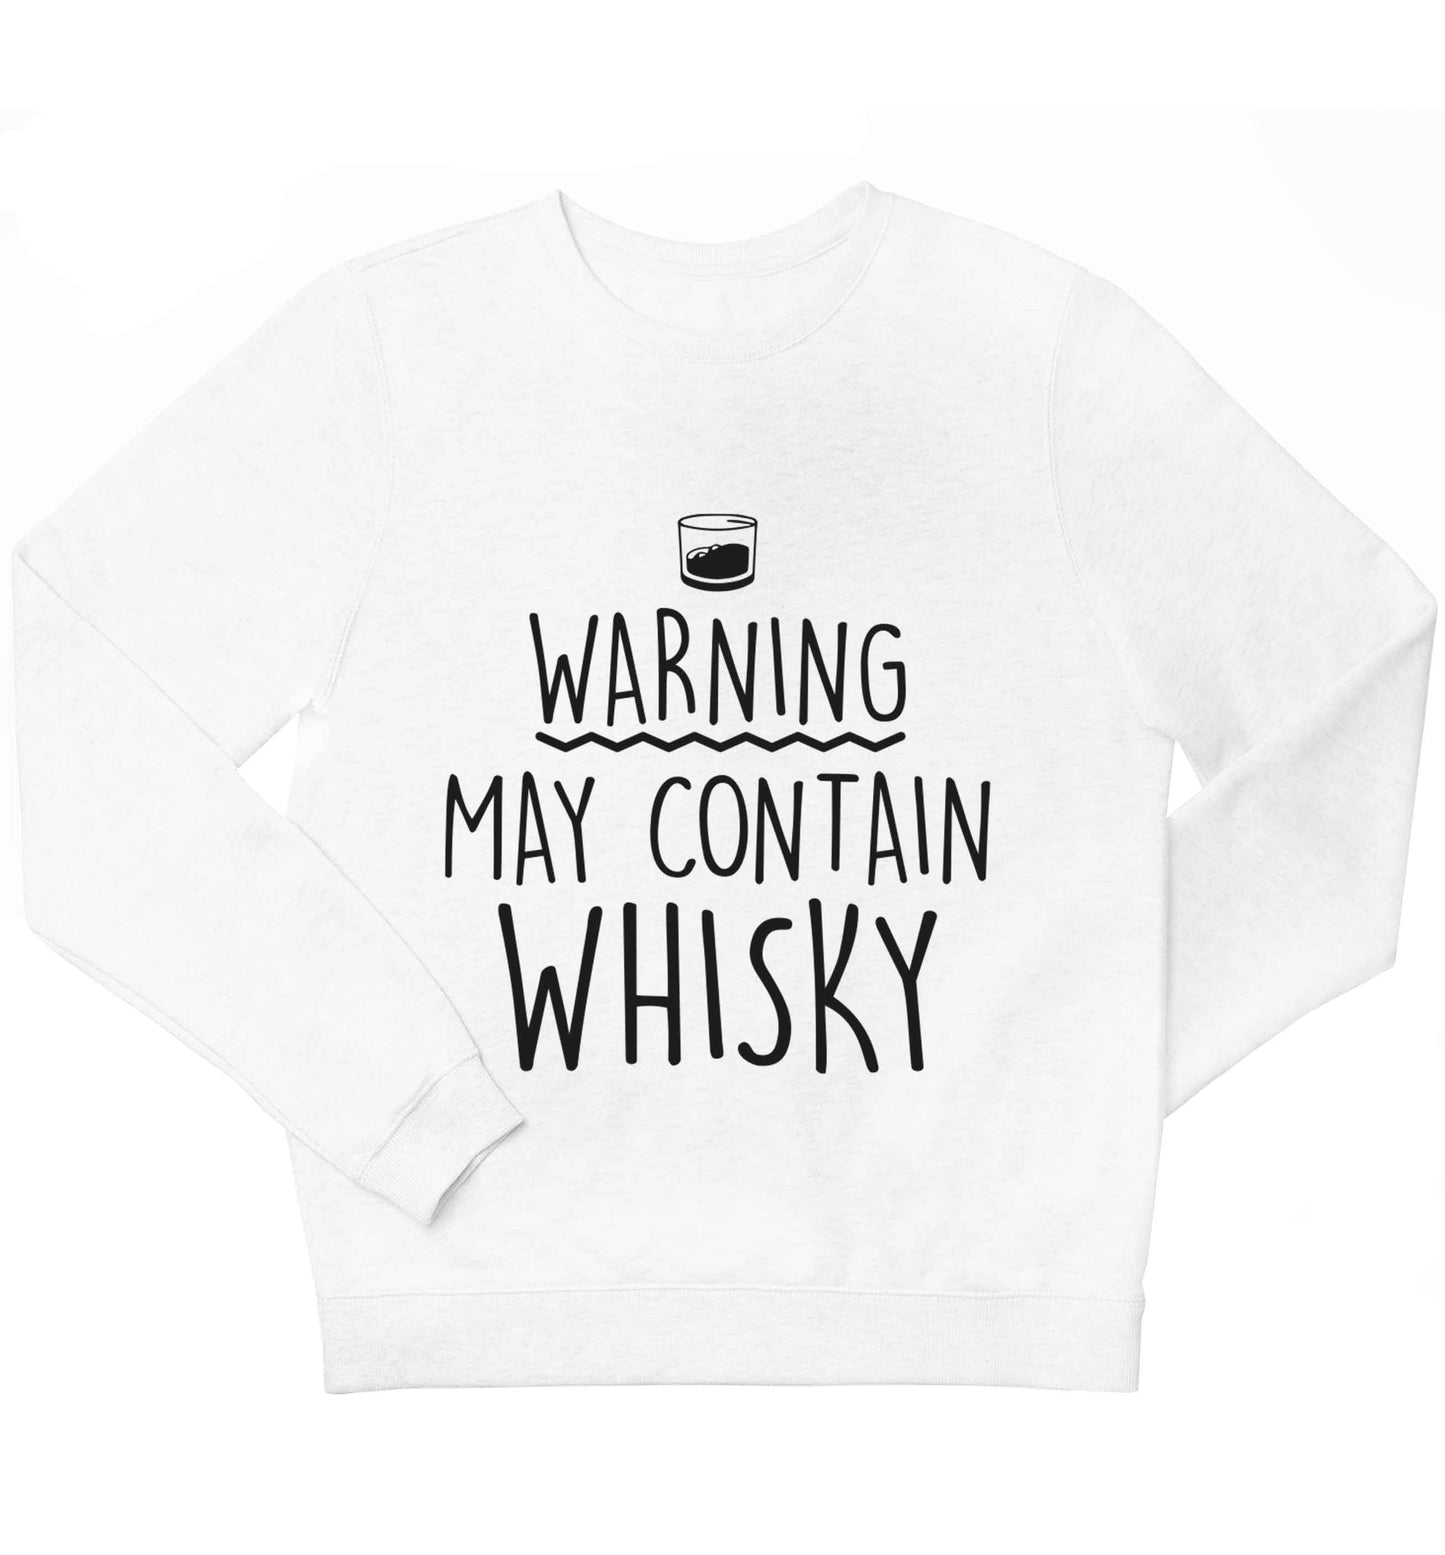 Warning may contain whisky adult's unisex white sweater 2XL